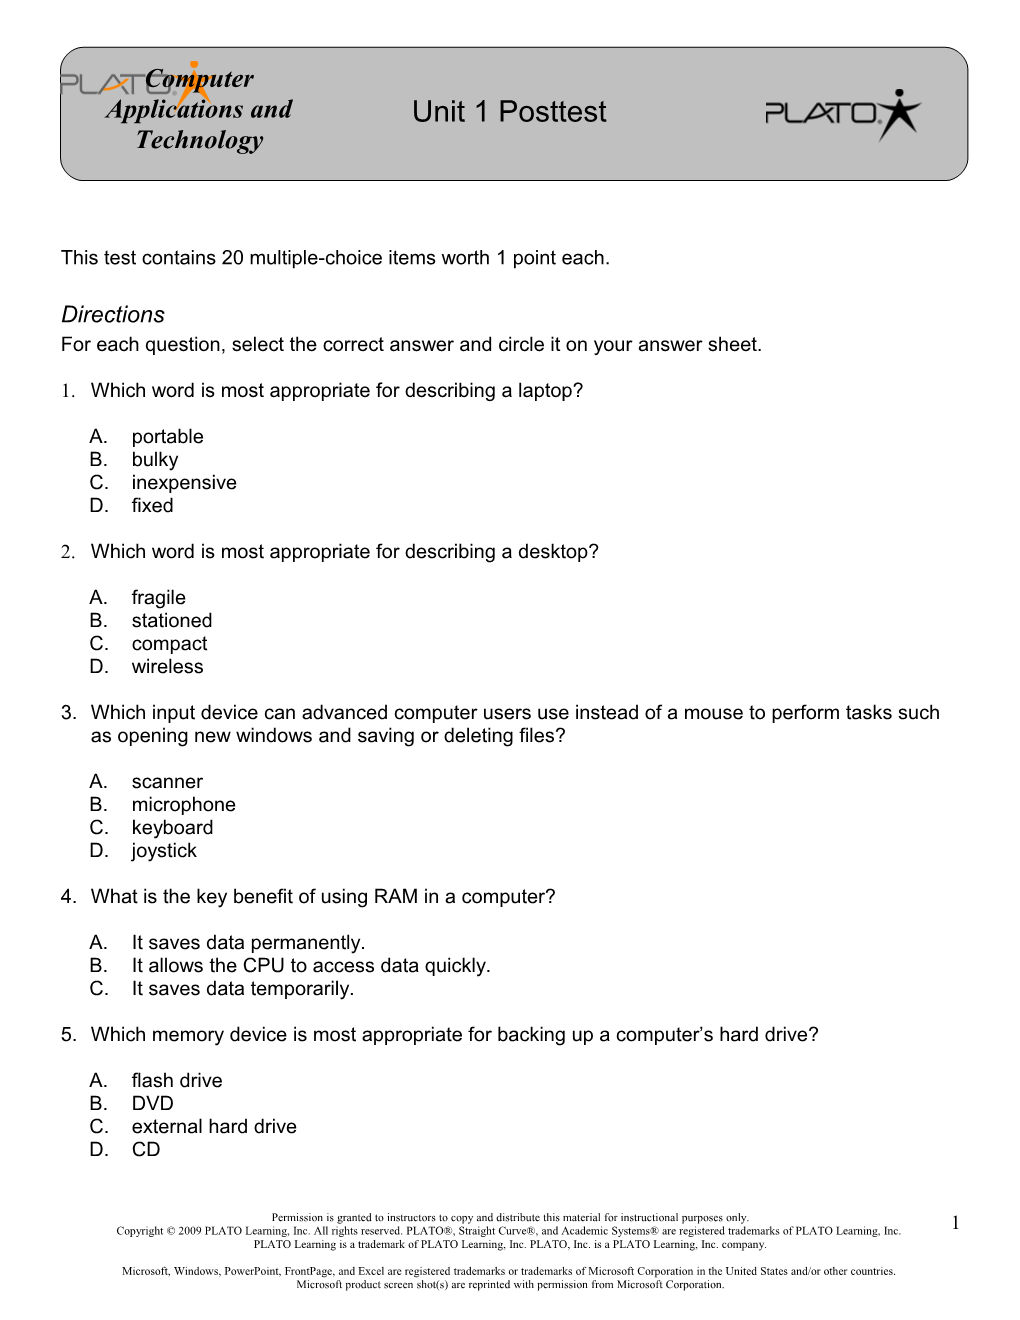 This Test Contains 20 Multiple-Choice Items Worth 1 Point Each